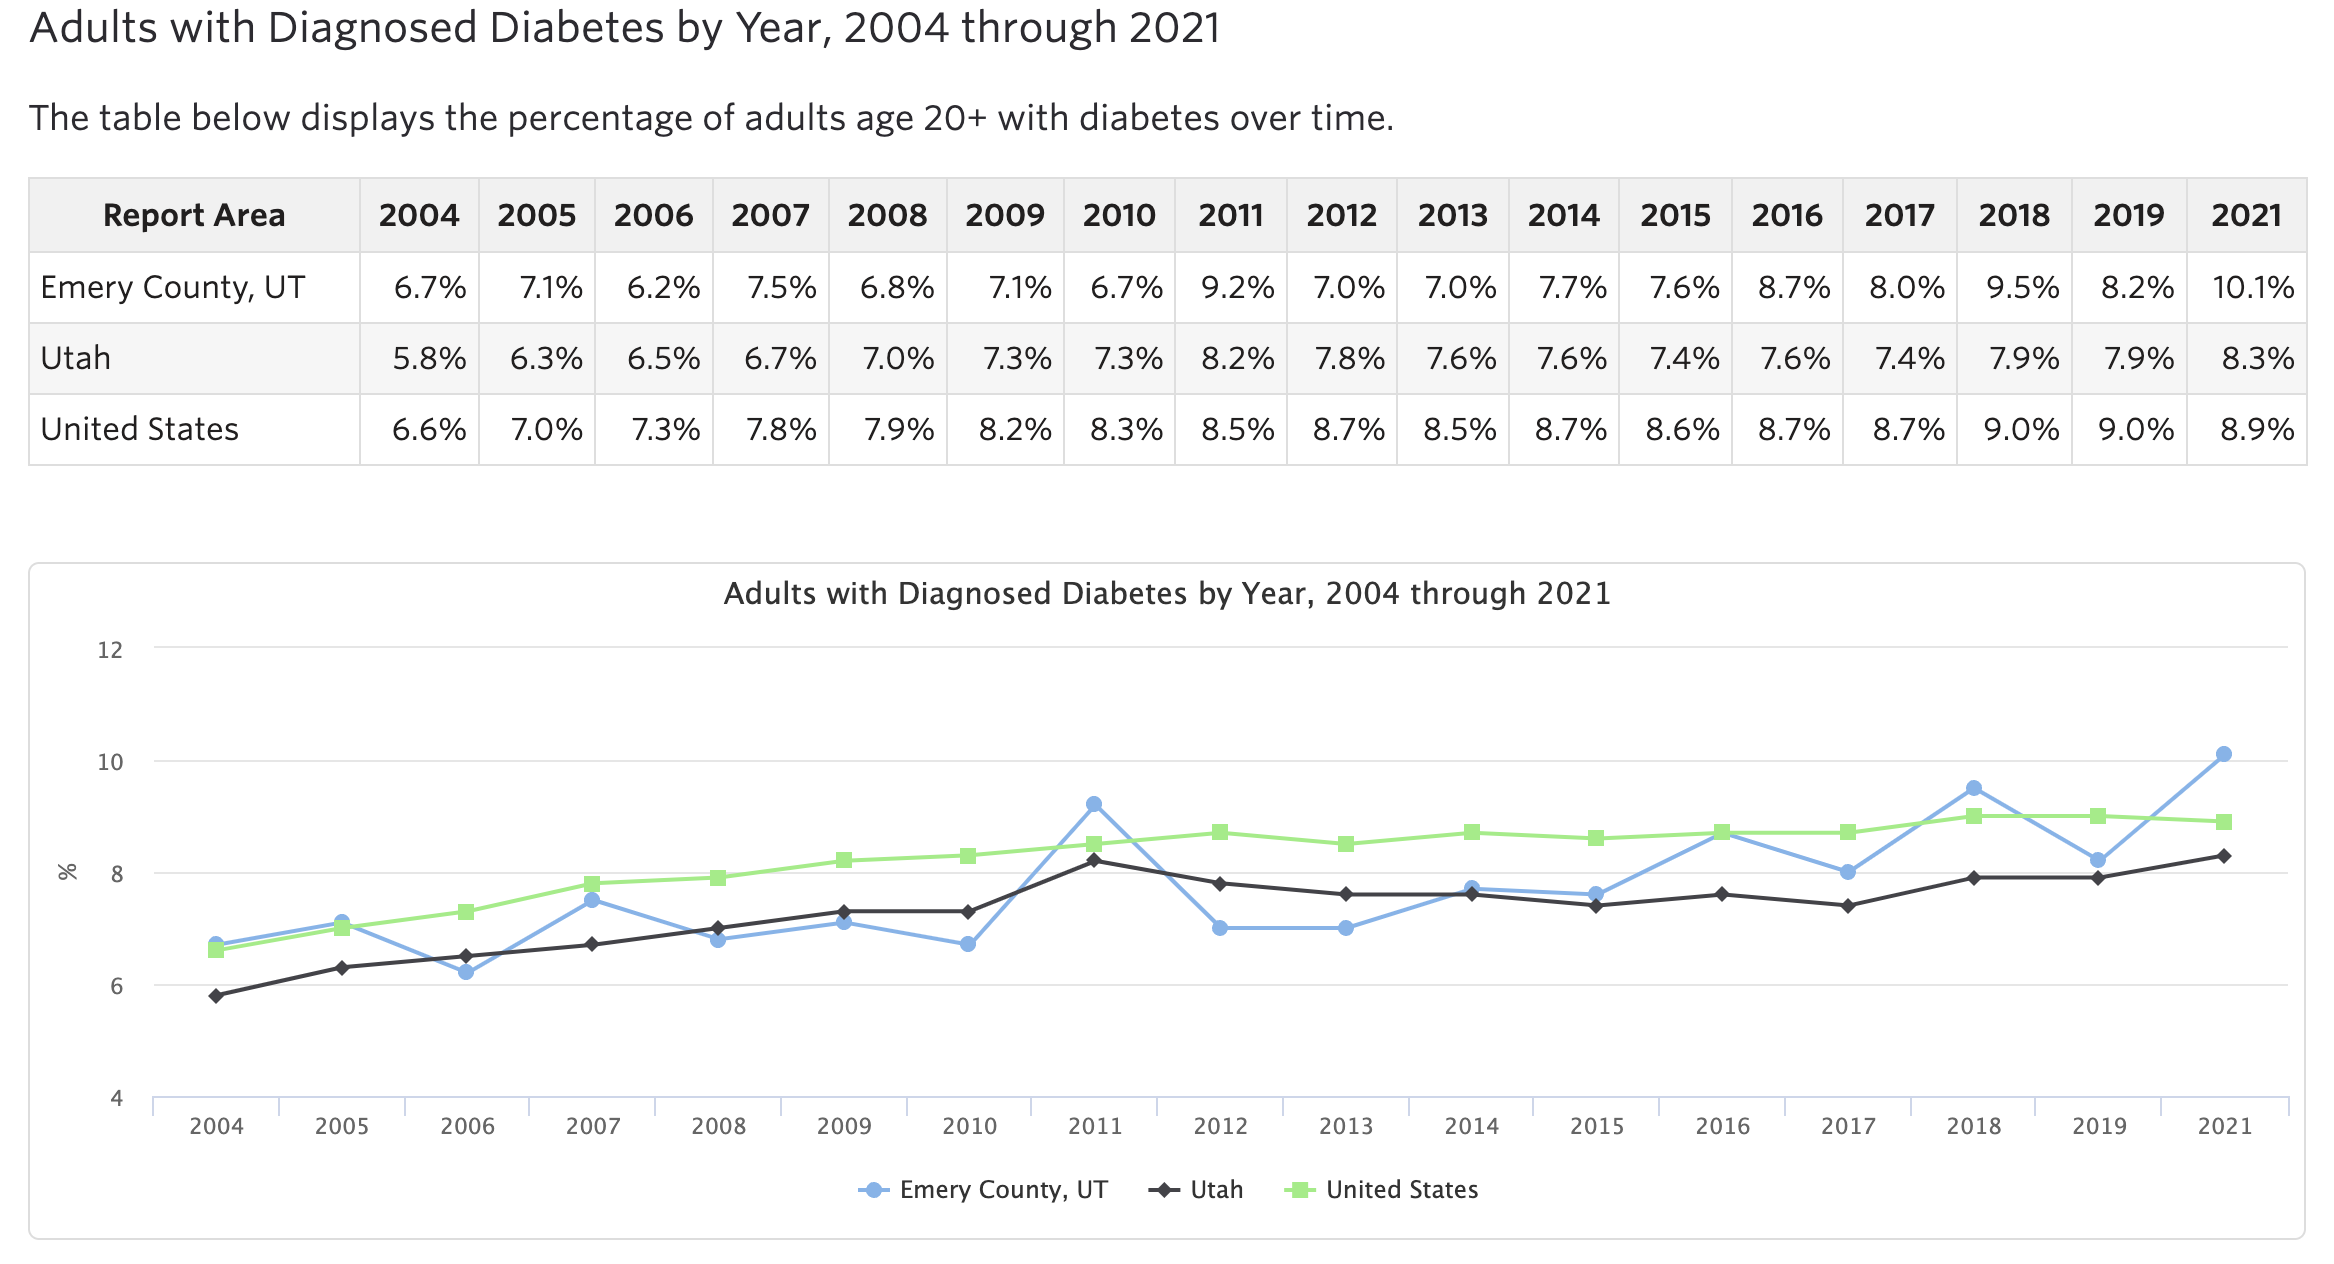 Graph showing diabetes prevalence data over time for the years 2004 - 2021 in a chart and line graph for Emery County, UT; the state of Utah; and the United States.